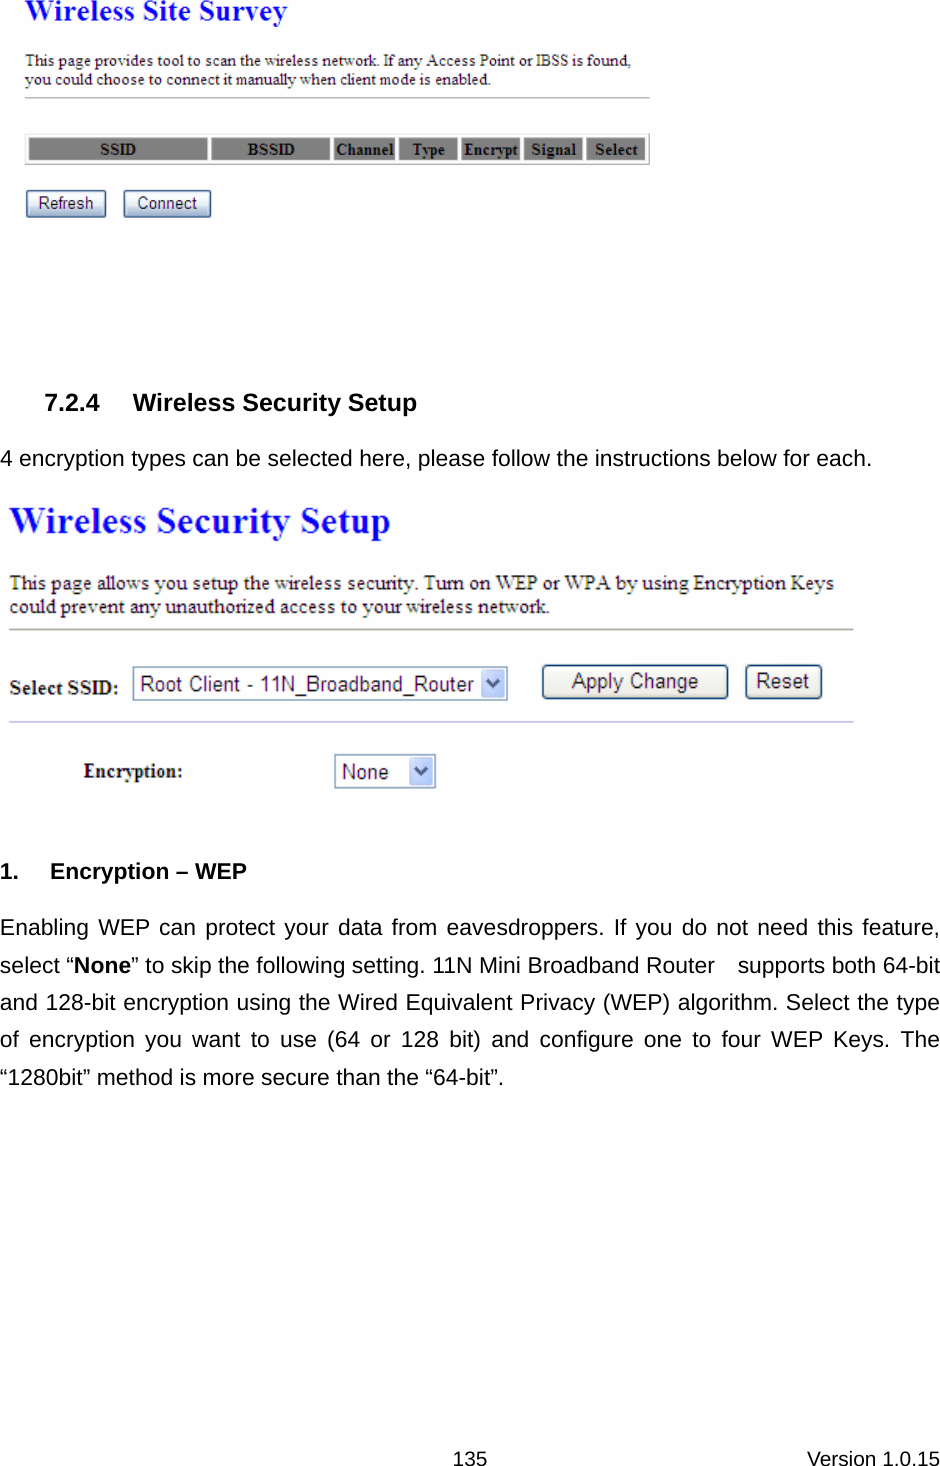 Version 1.0.15 135  7.2.4  Wireless Security Setup 4 encryption types can be selected here, please follow the instructions below for each.    1.  Encryption – WEP Enabling WEP can protect your data from eavesdroppers. If you do not need this feature, select “None” to skip the following setting. 11N Mini Broadband Router    supports both 64-bit and 128-bit encryption using the Wired Equivalent Privacy (WEP) algorithm. Select the type of encryption you want to use (64 or 128 bit) and configure one to four WEP Keys. The “1280bit” method is more secure than the “64-bit”.     